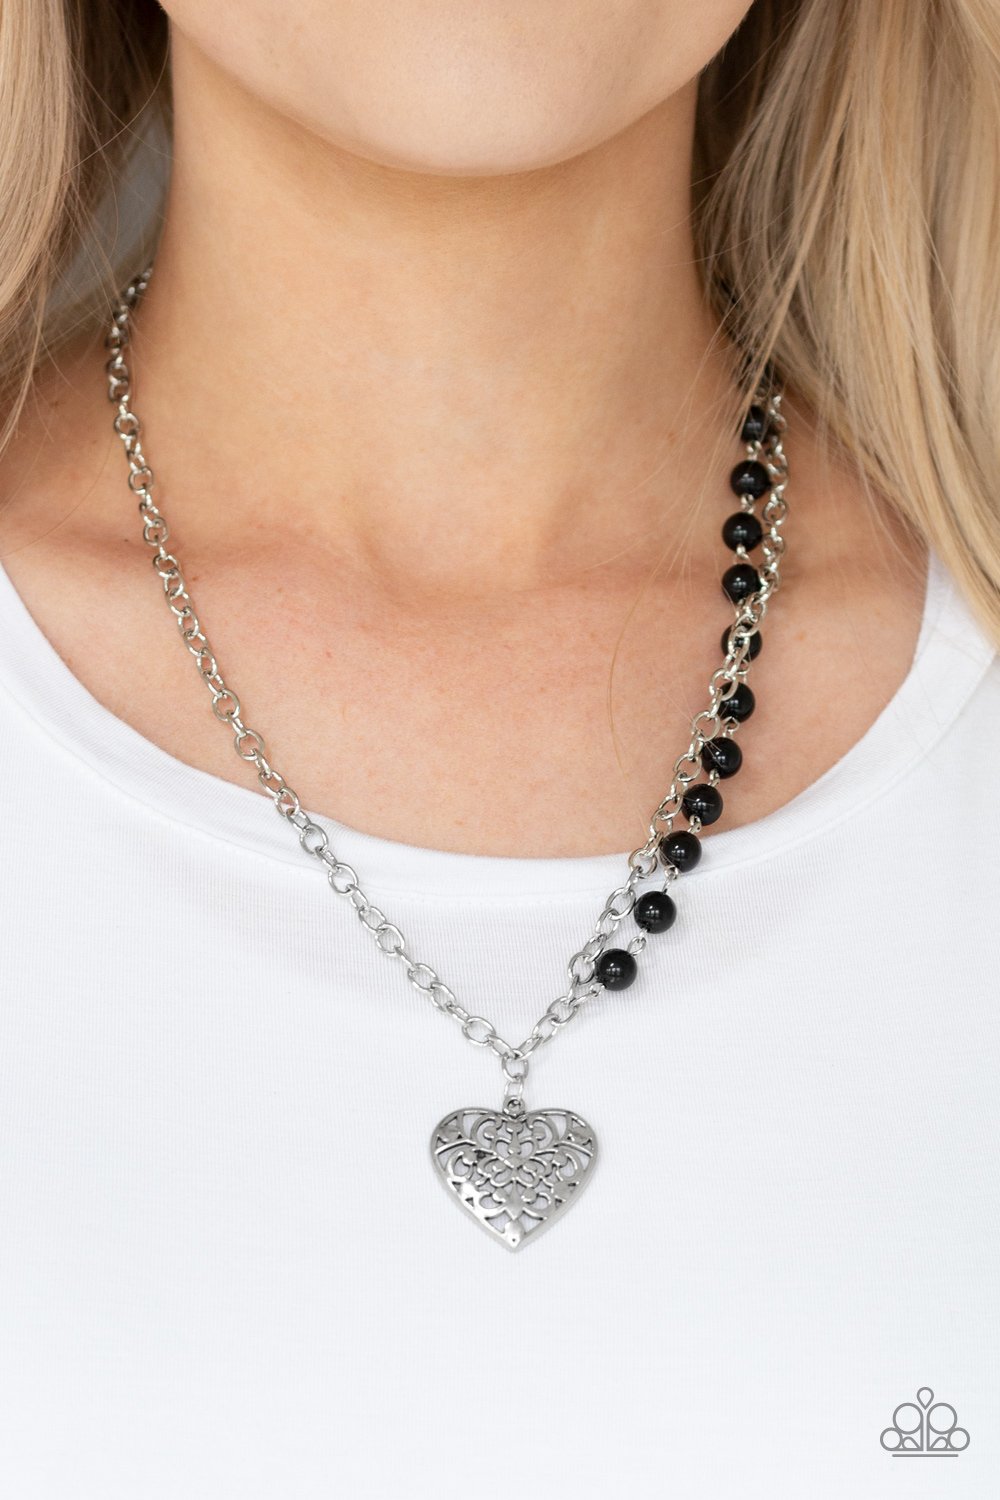 Forever in My Heart-black-Paparazzi necklace